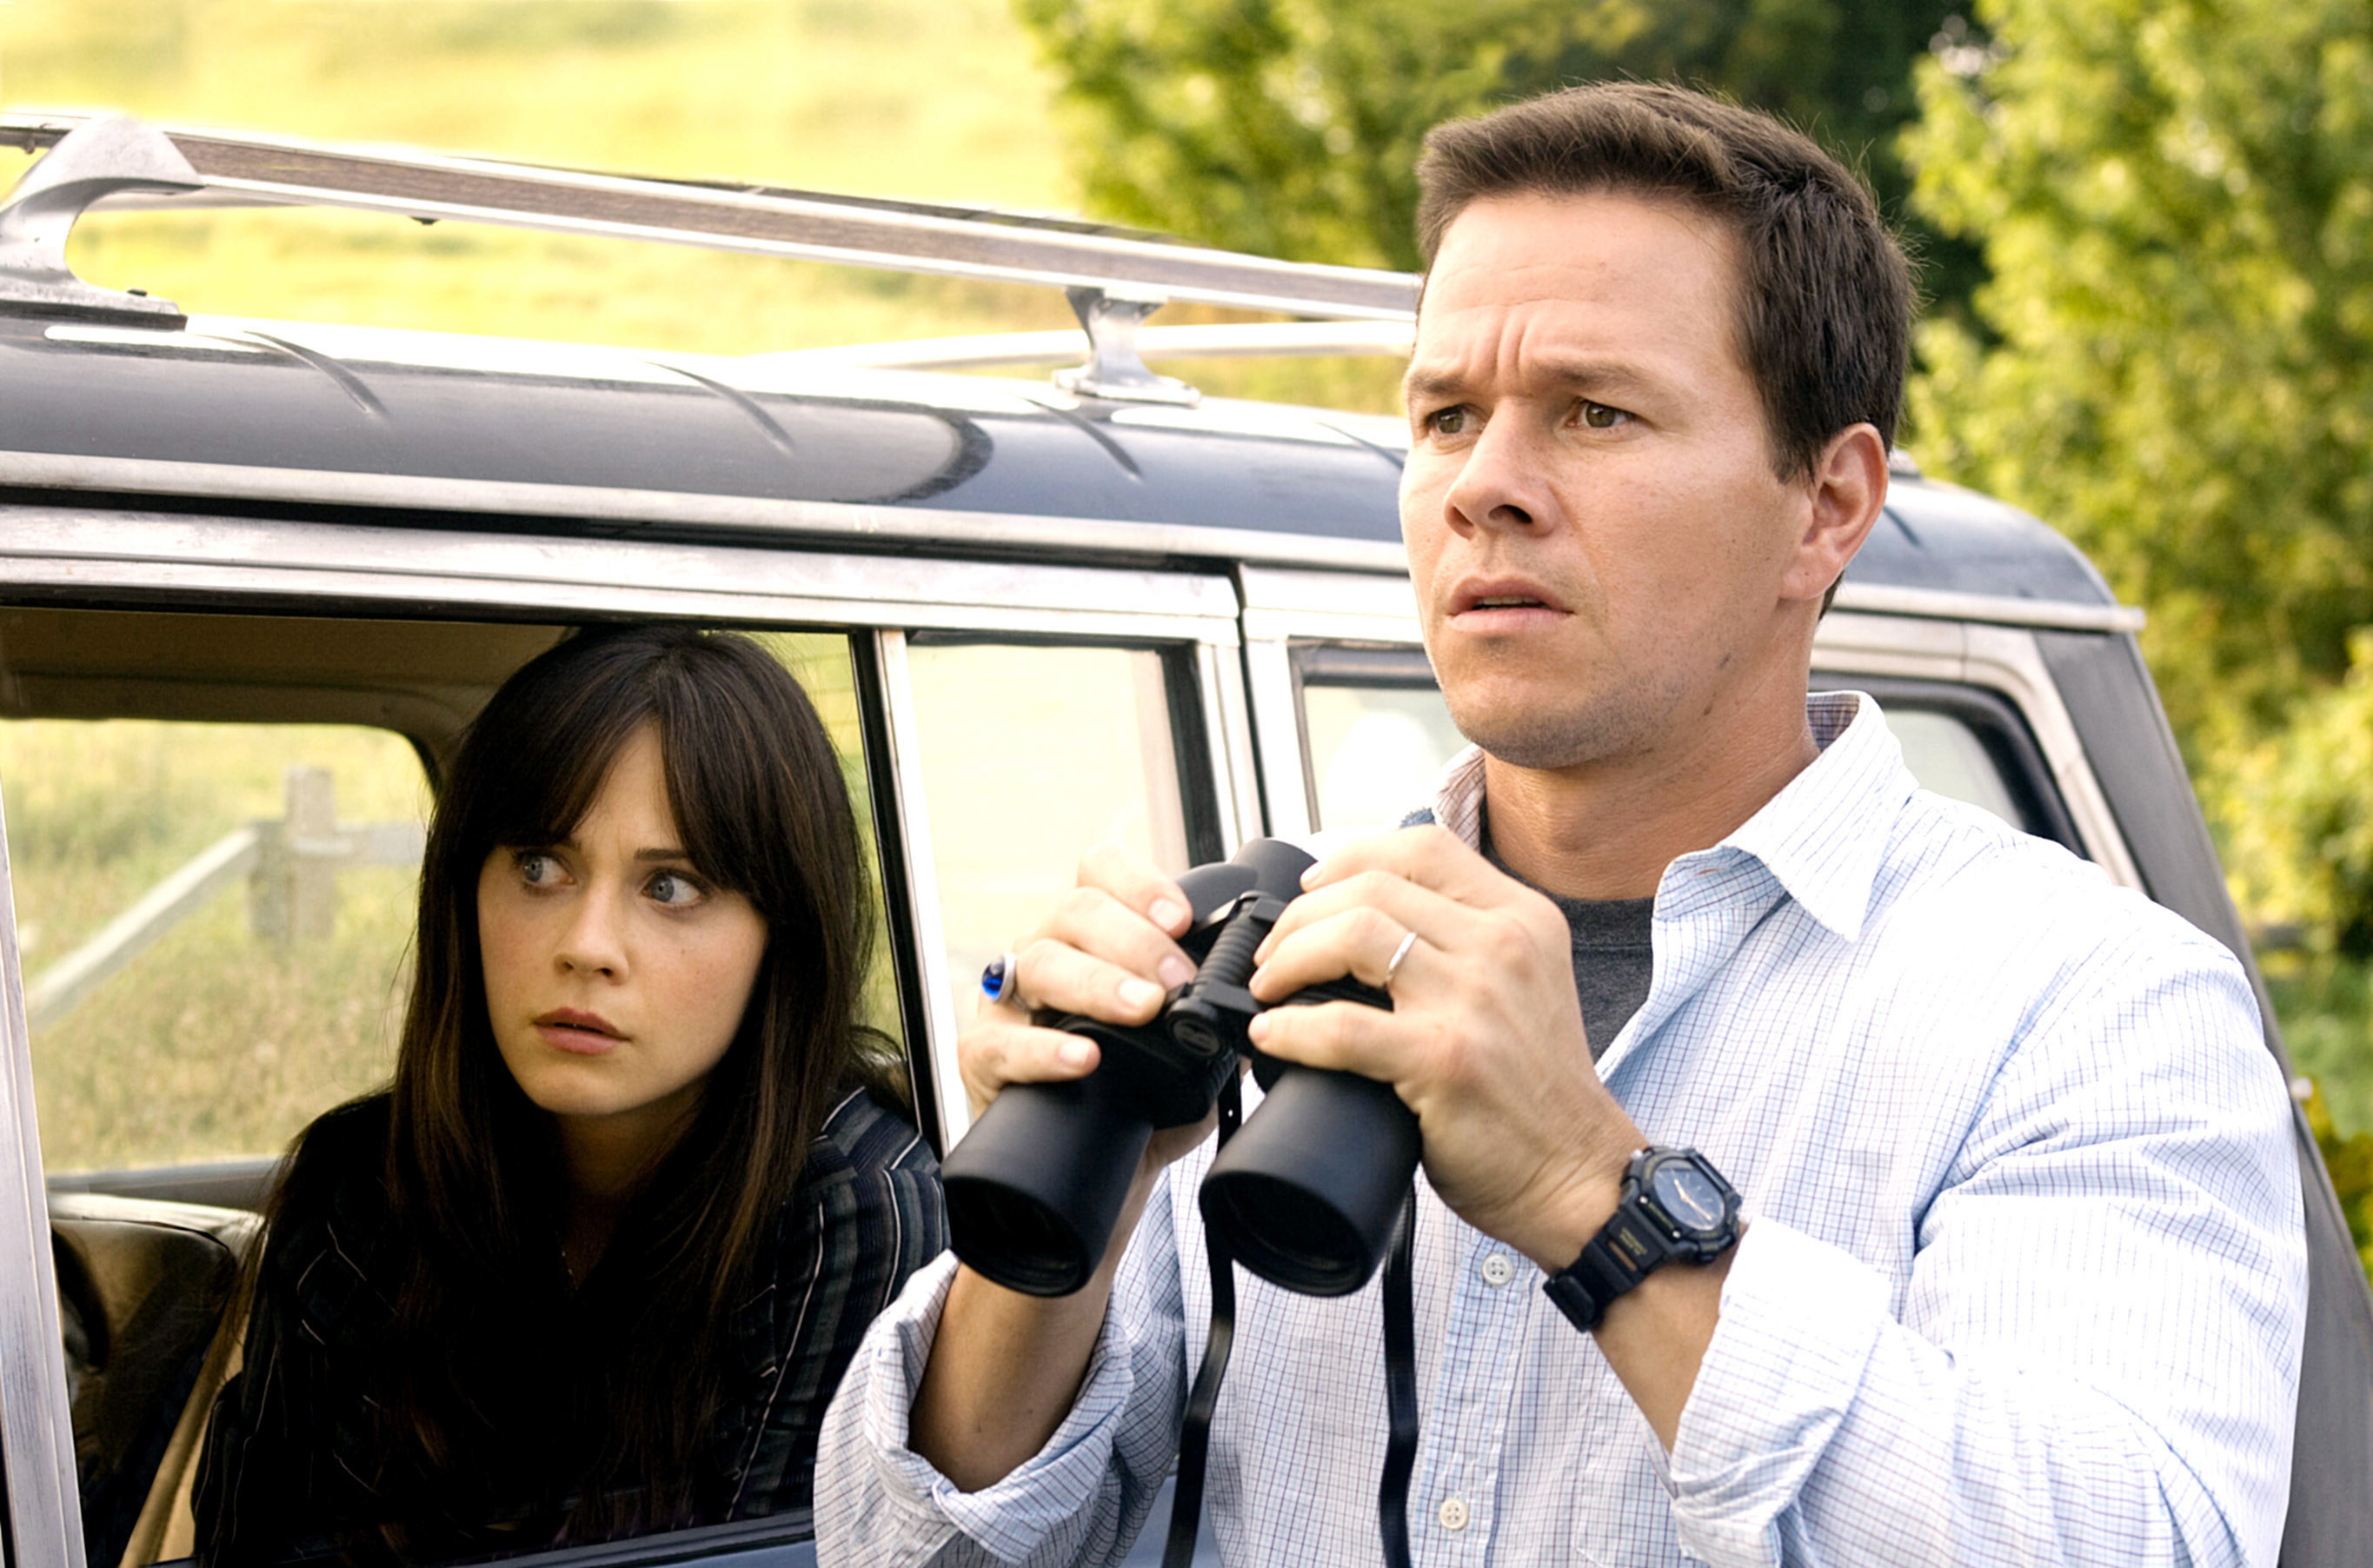 A woman in a car and a man standing next to it holding binoculars